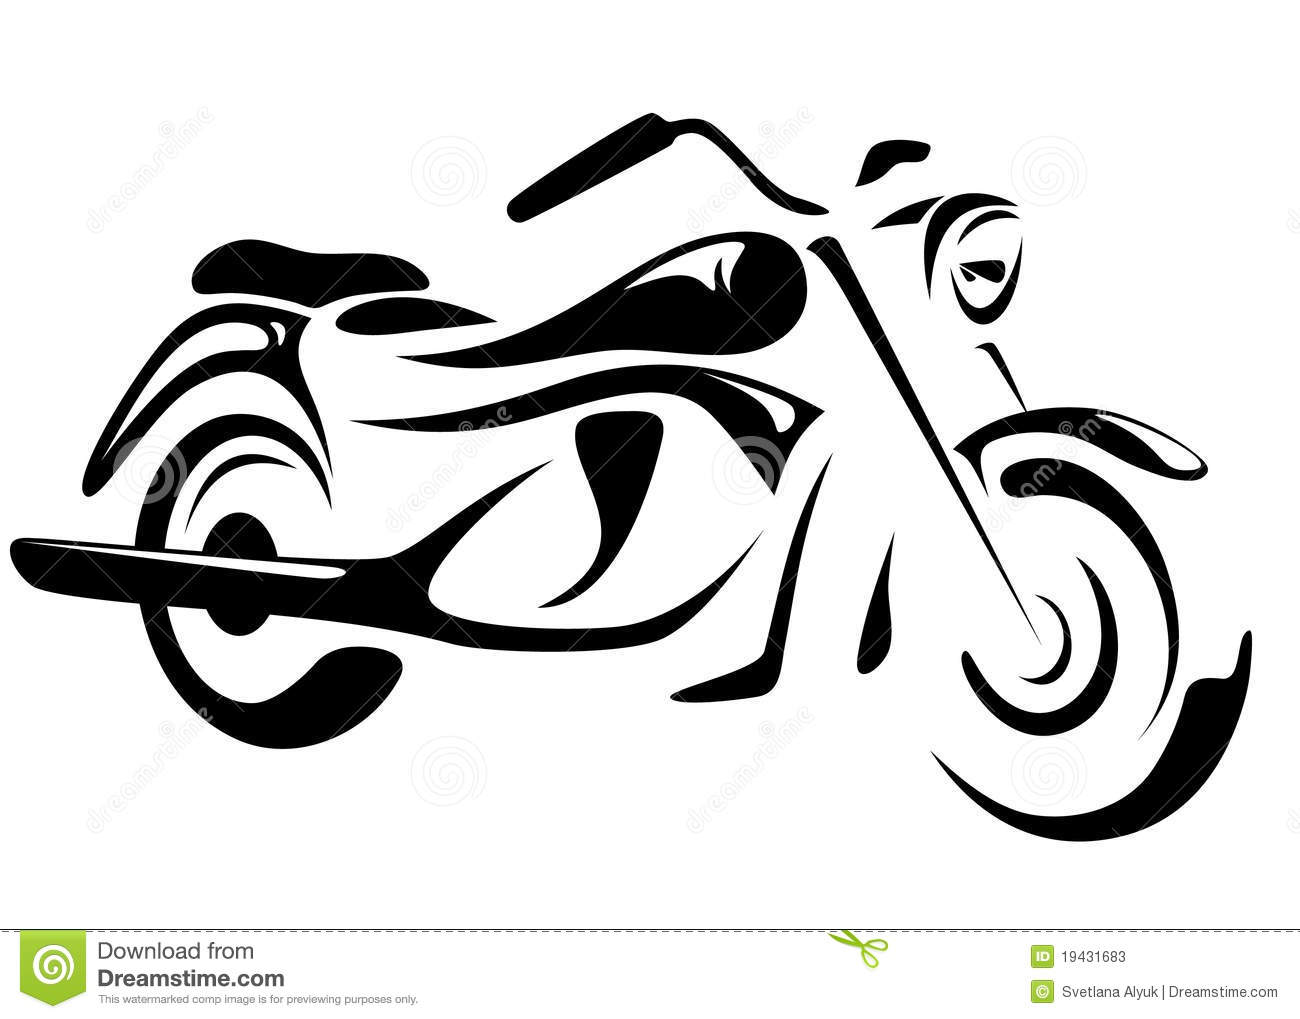 Images For > Motorcycle Rider Clip Art.